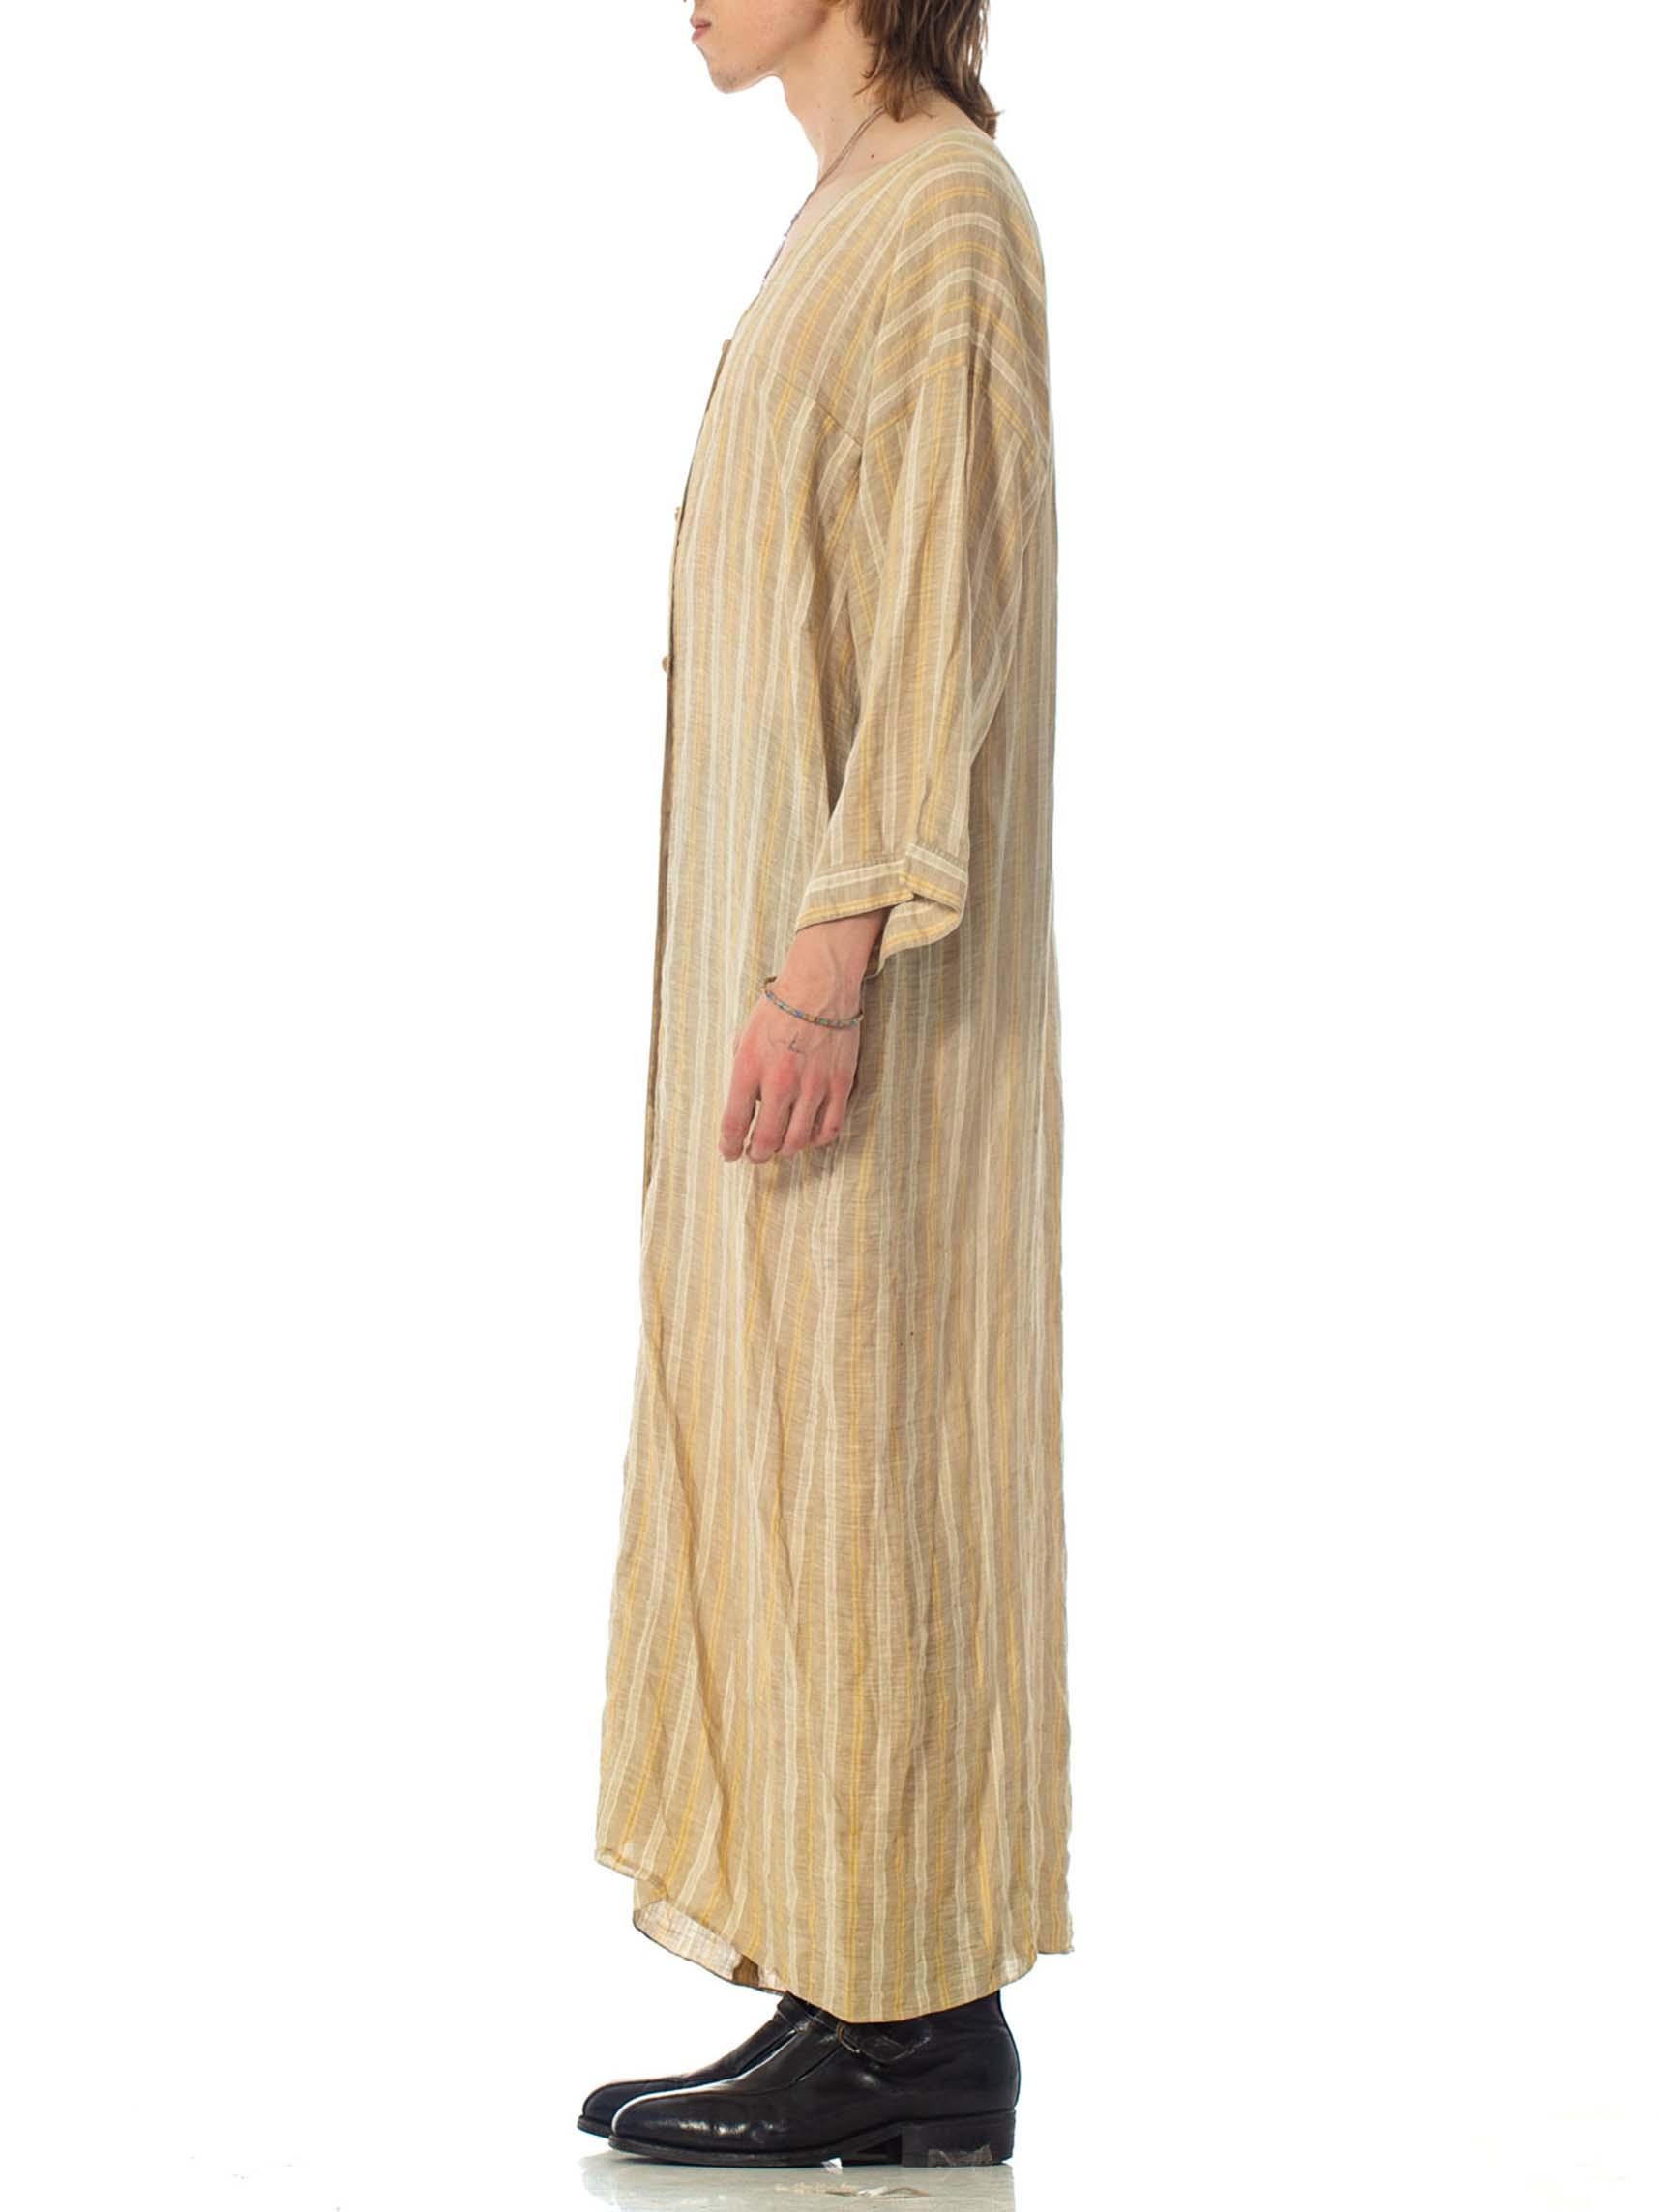 Women's or Men's 1970S ISSEY MIYAKE STYLE- Style Beige & White Cotton Blend Tunic Duster For Sale